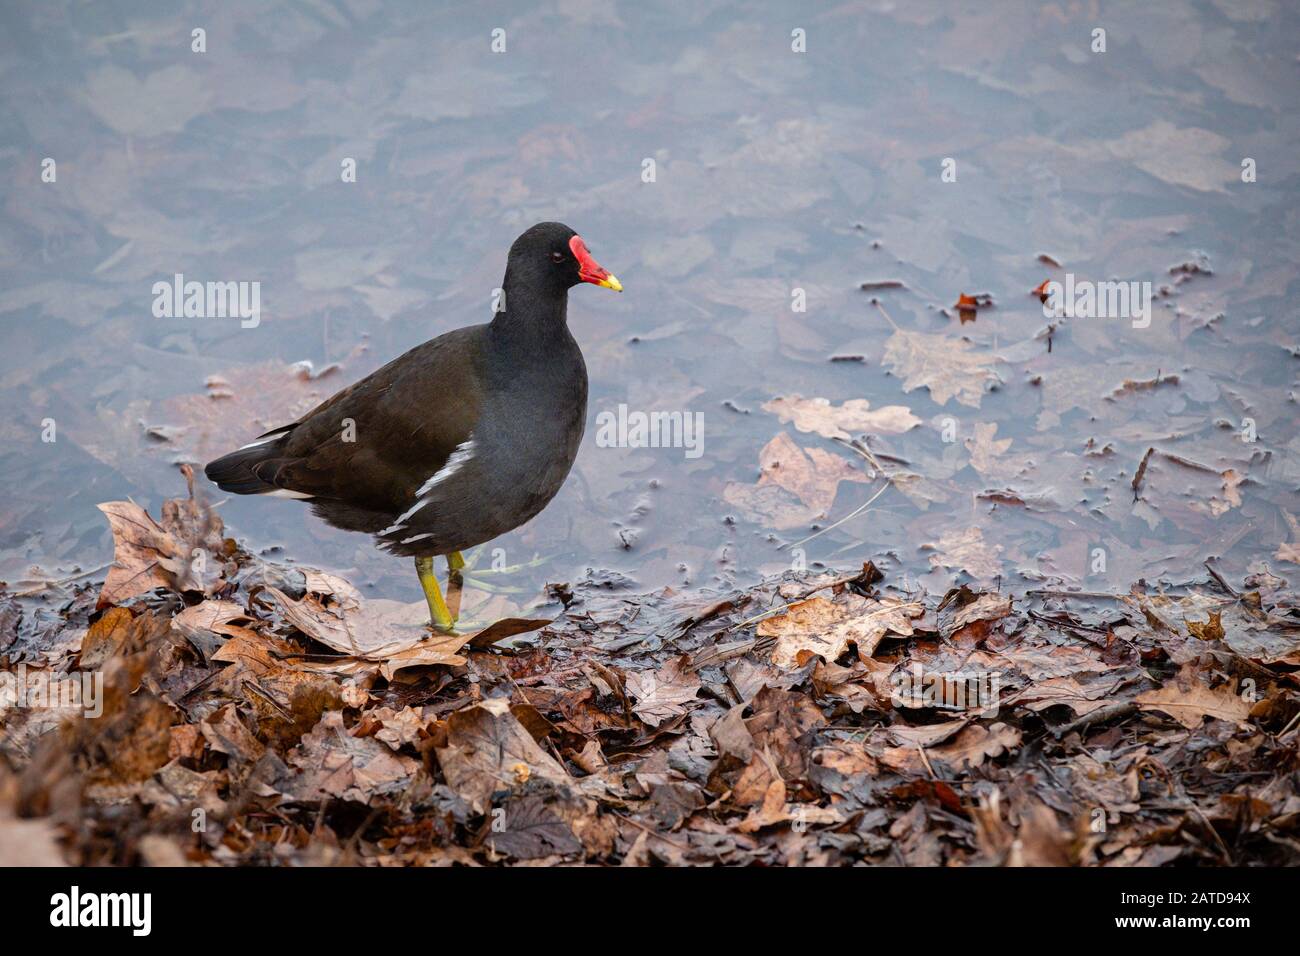 A Gallinule, water hen, on the edge of a lake, feet in the dead leaves Stock Photo